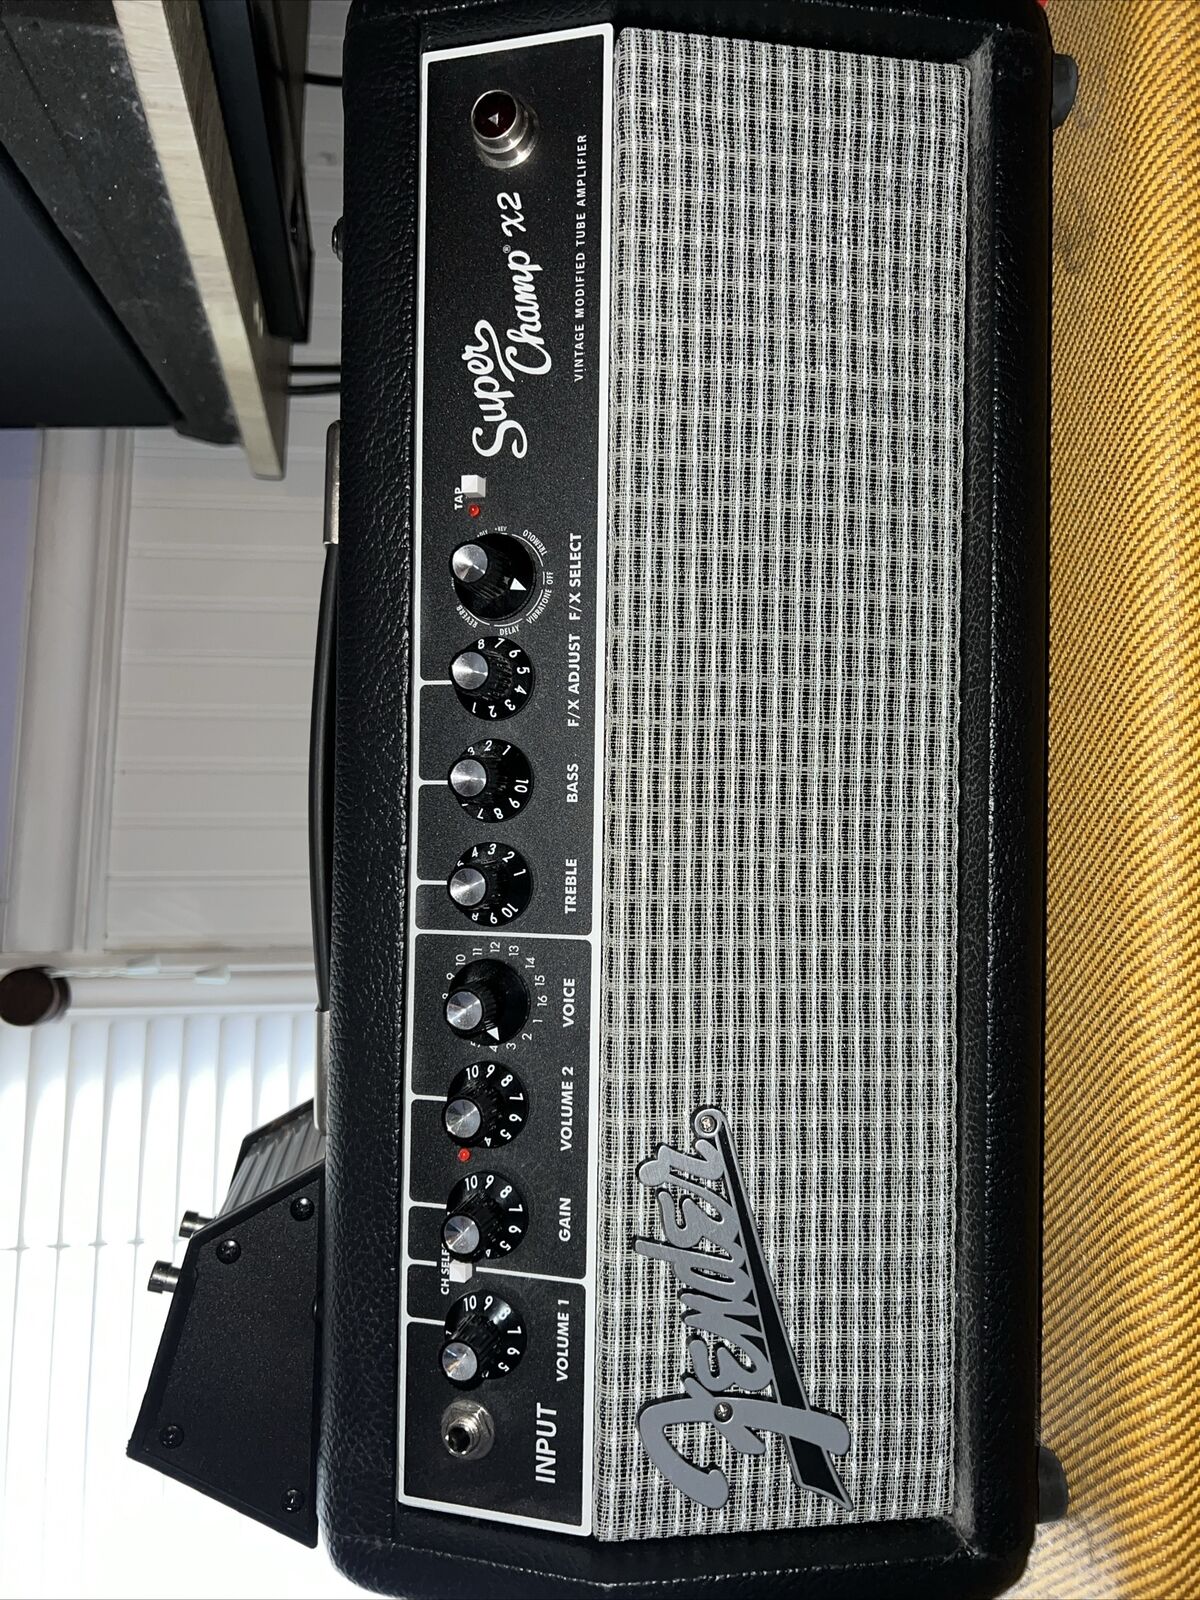 FENDER SUPER CHAMP X2 AMP HEAD-  WORKS GREAT EXCELLENT CONDITION 8 Ohms 15 WATTS